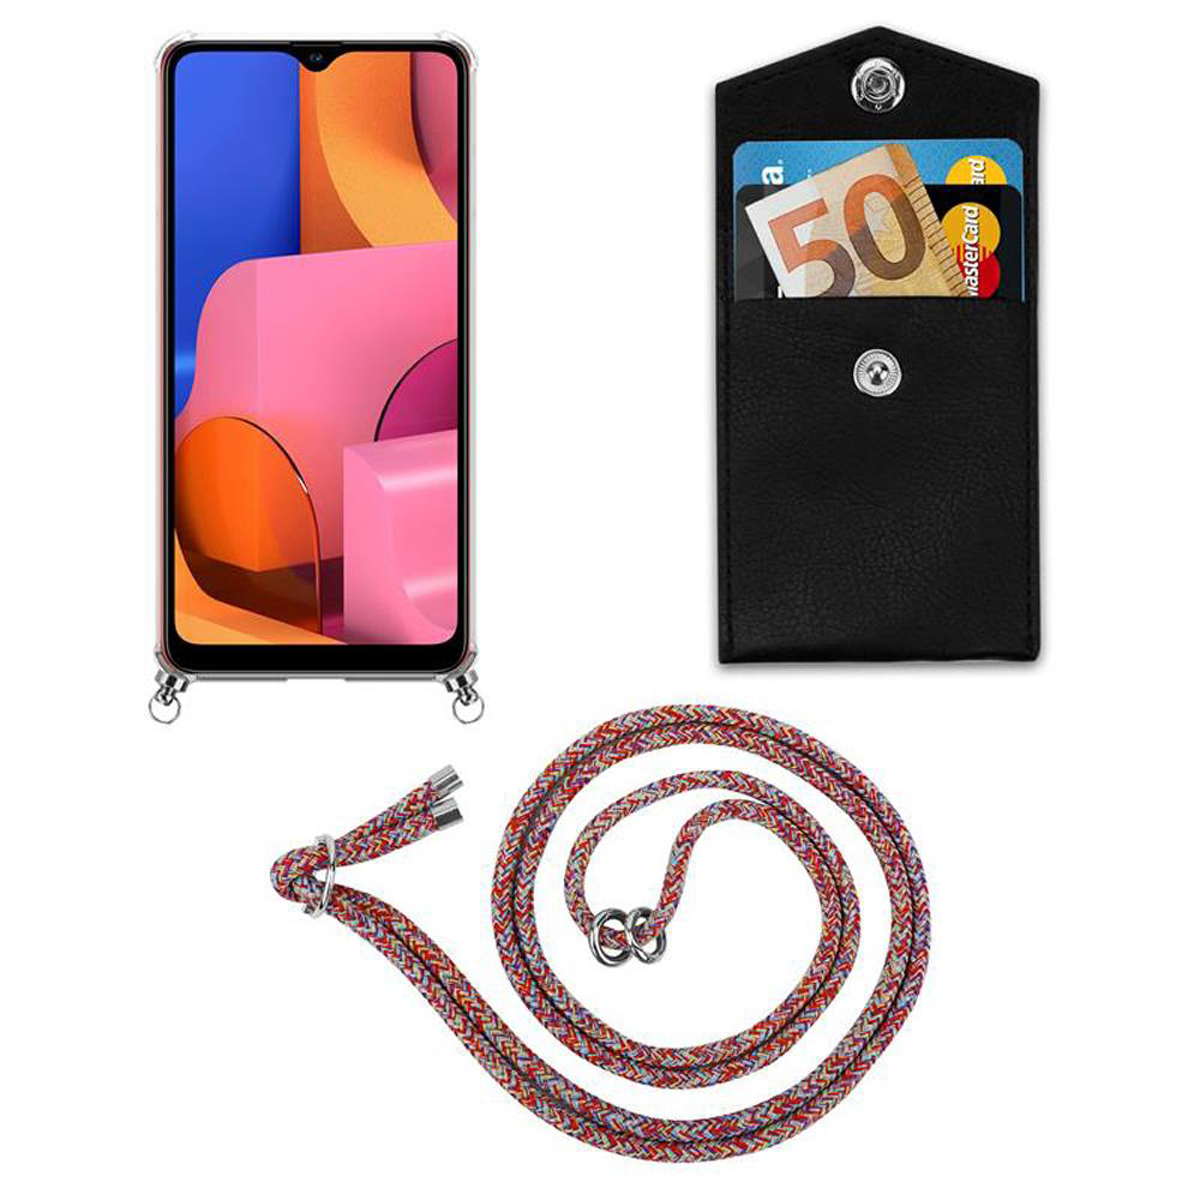 CADORABO Handy Kette Samsung, und PARROT Ringen, Kordel mit abnehmbarer A21, Silber Backcover, Band Hülle, COLORFUL Galaxy